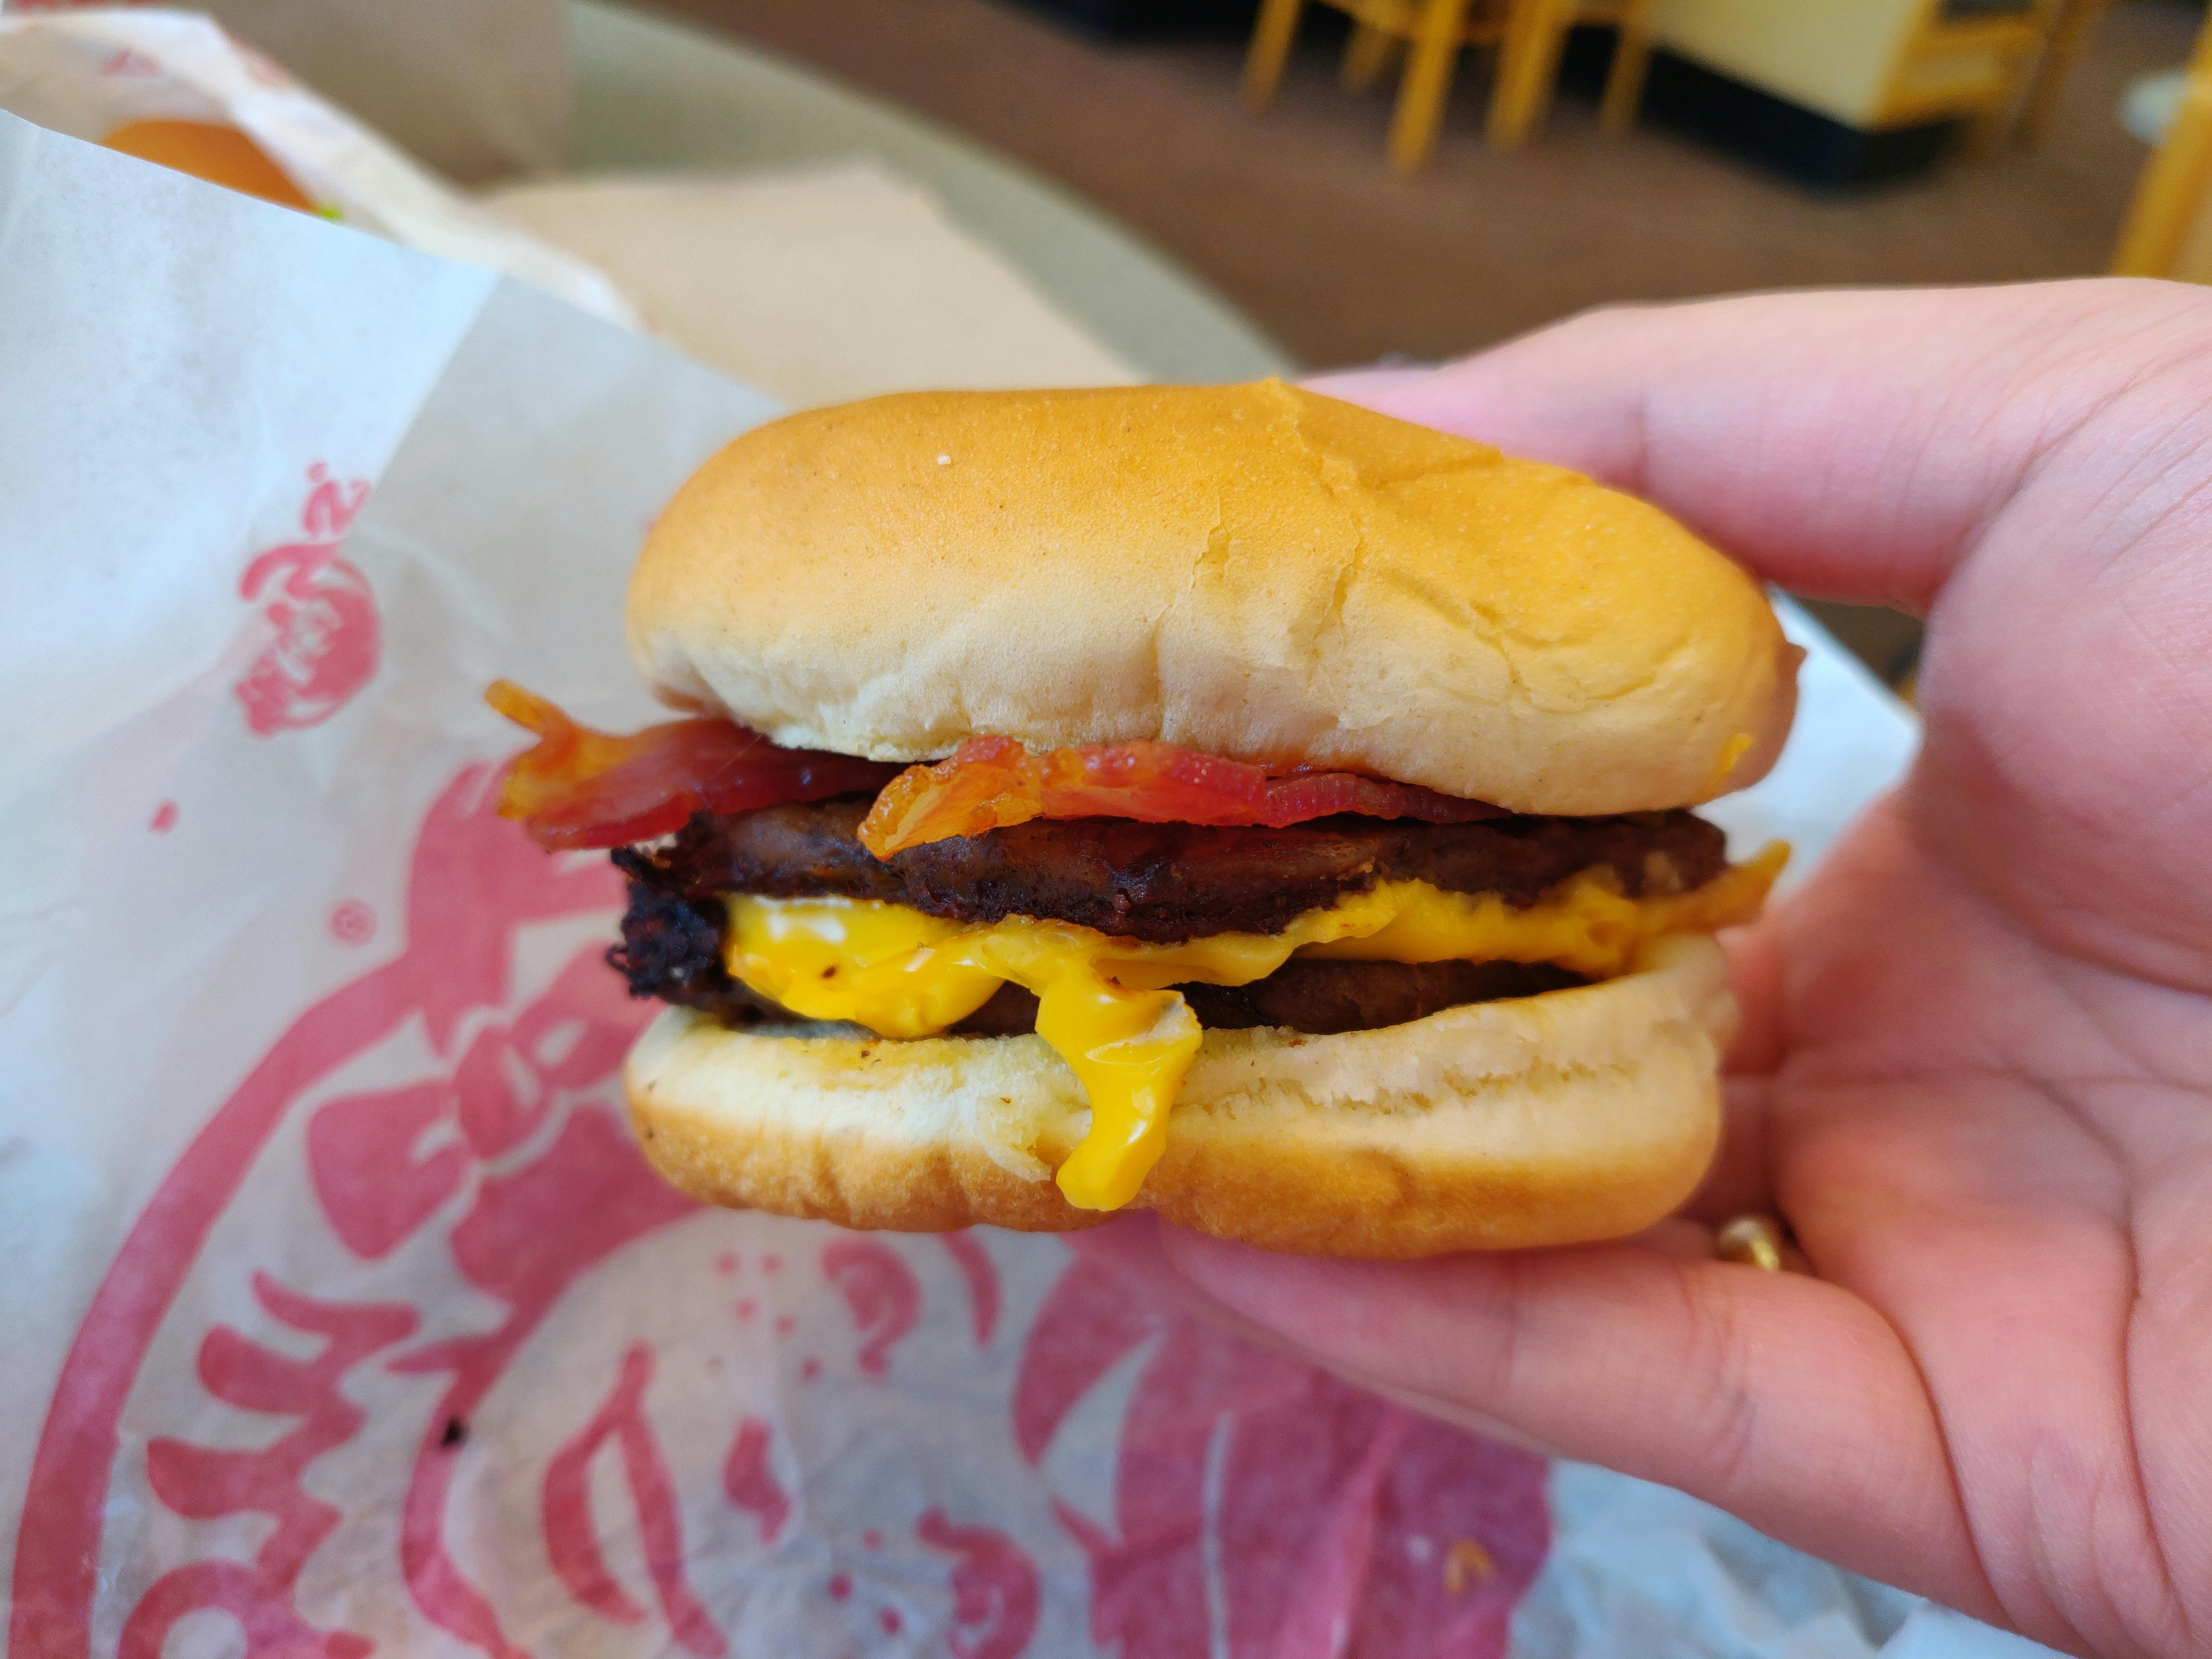 A person's hand holding a Wendy's Bacon Double Stack burger above its paper wrapper..